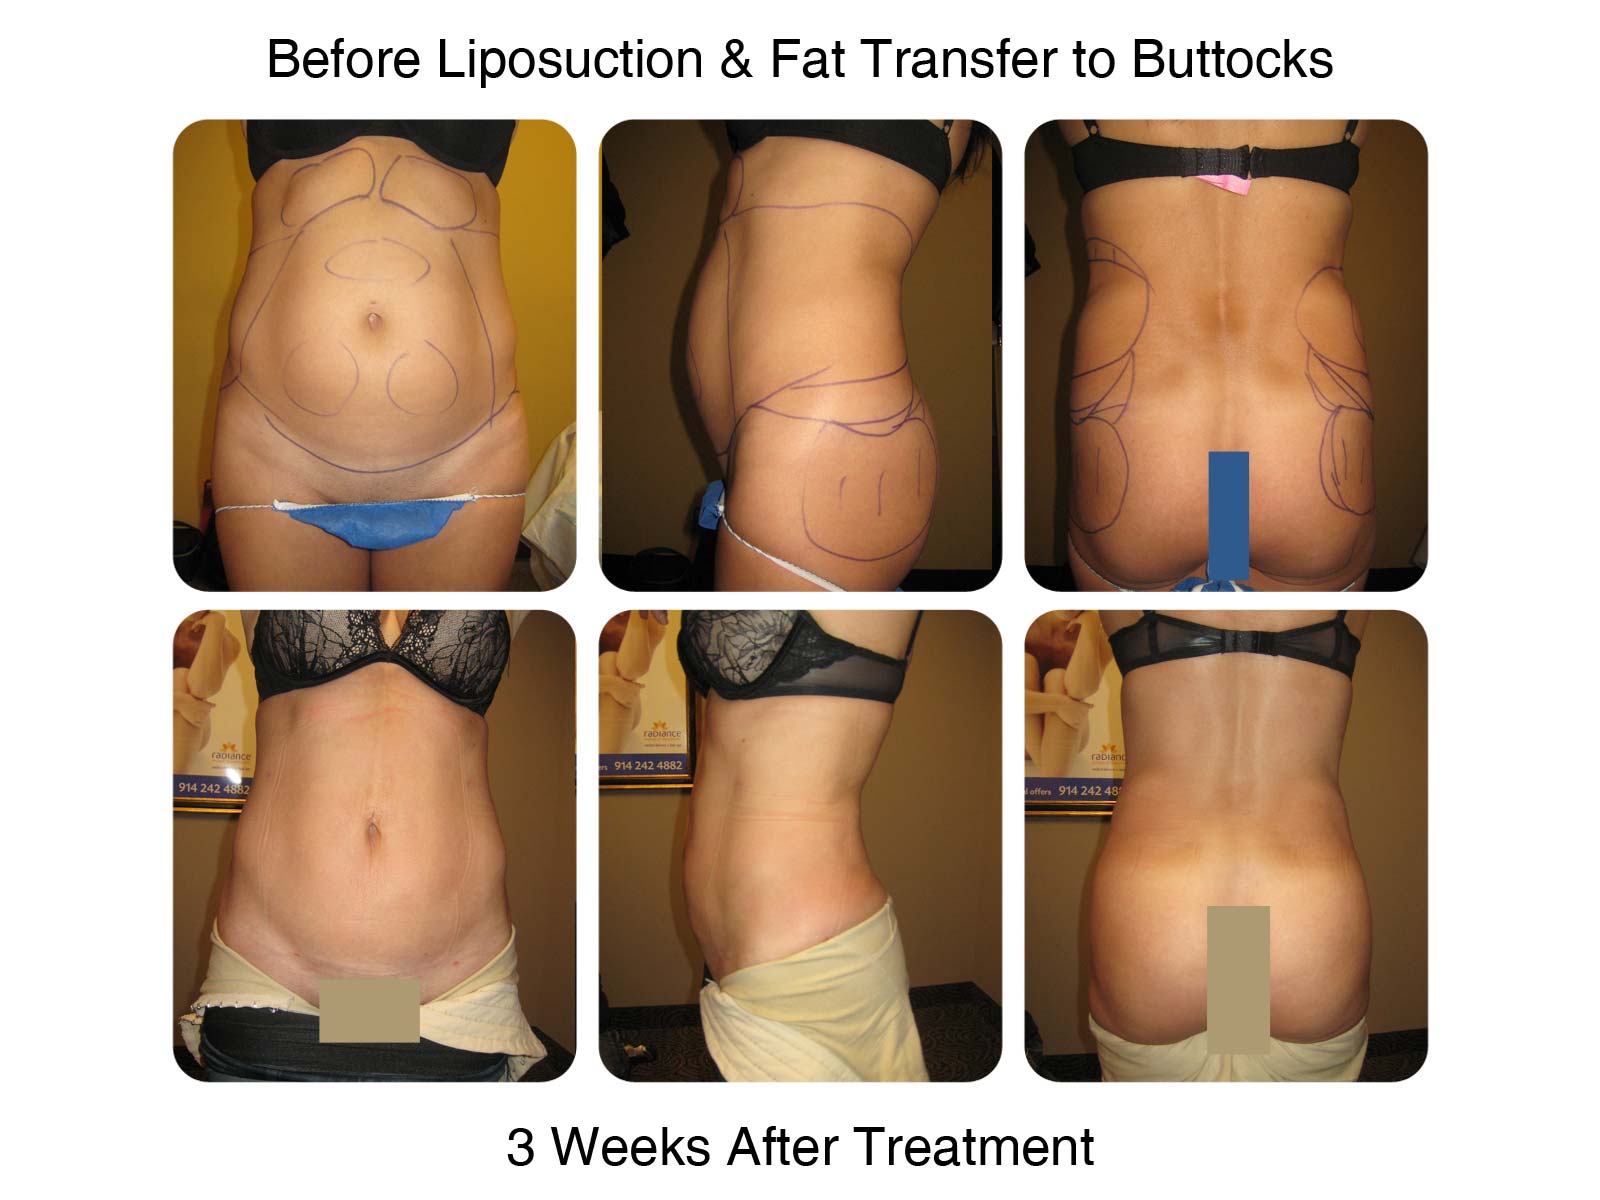 Brazilian Butt Lift Fat Transfer Before and After 3